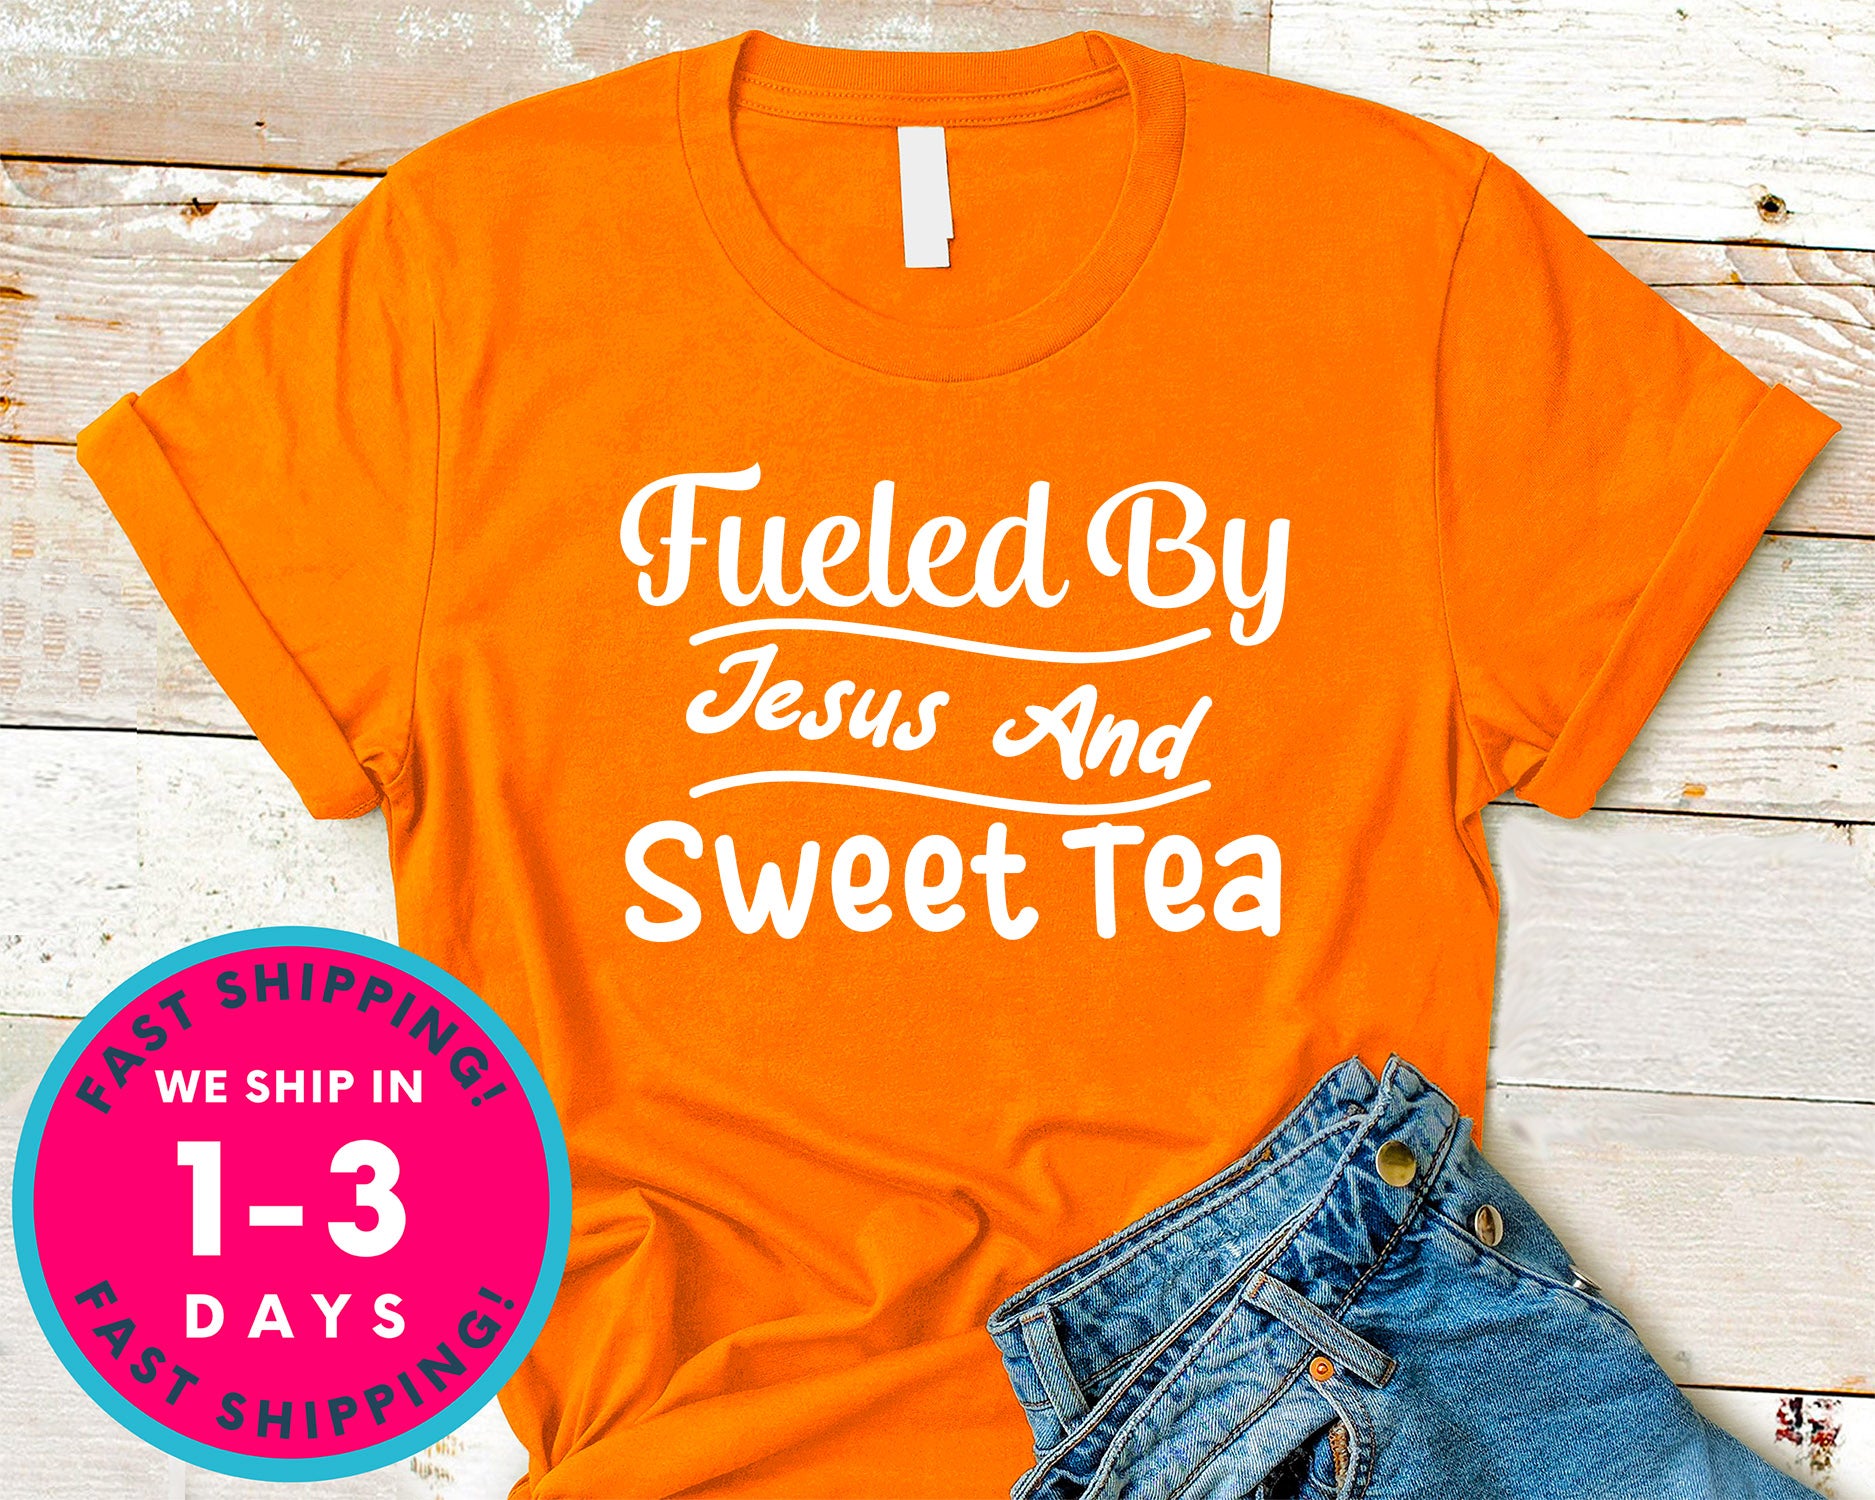 Fueled By Jesus And Sweet Tea